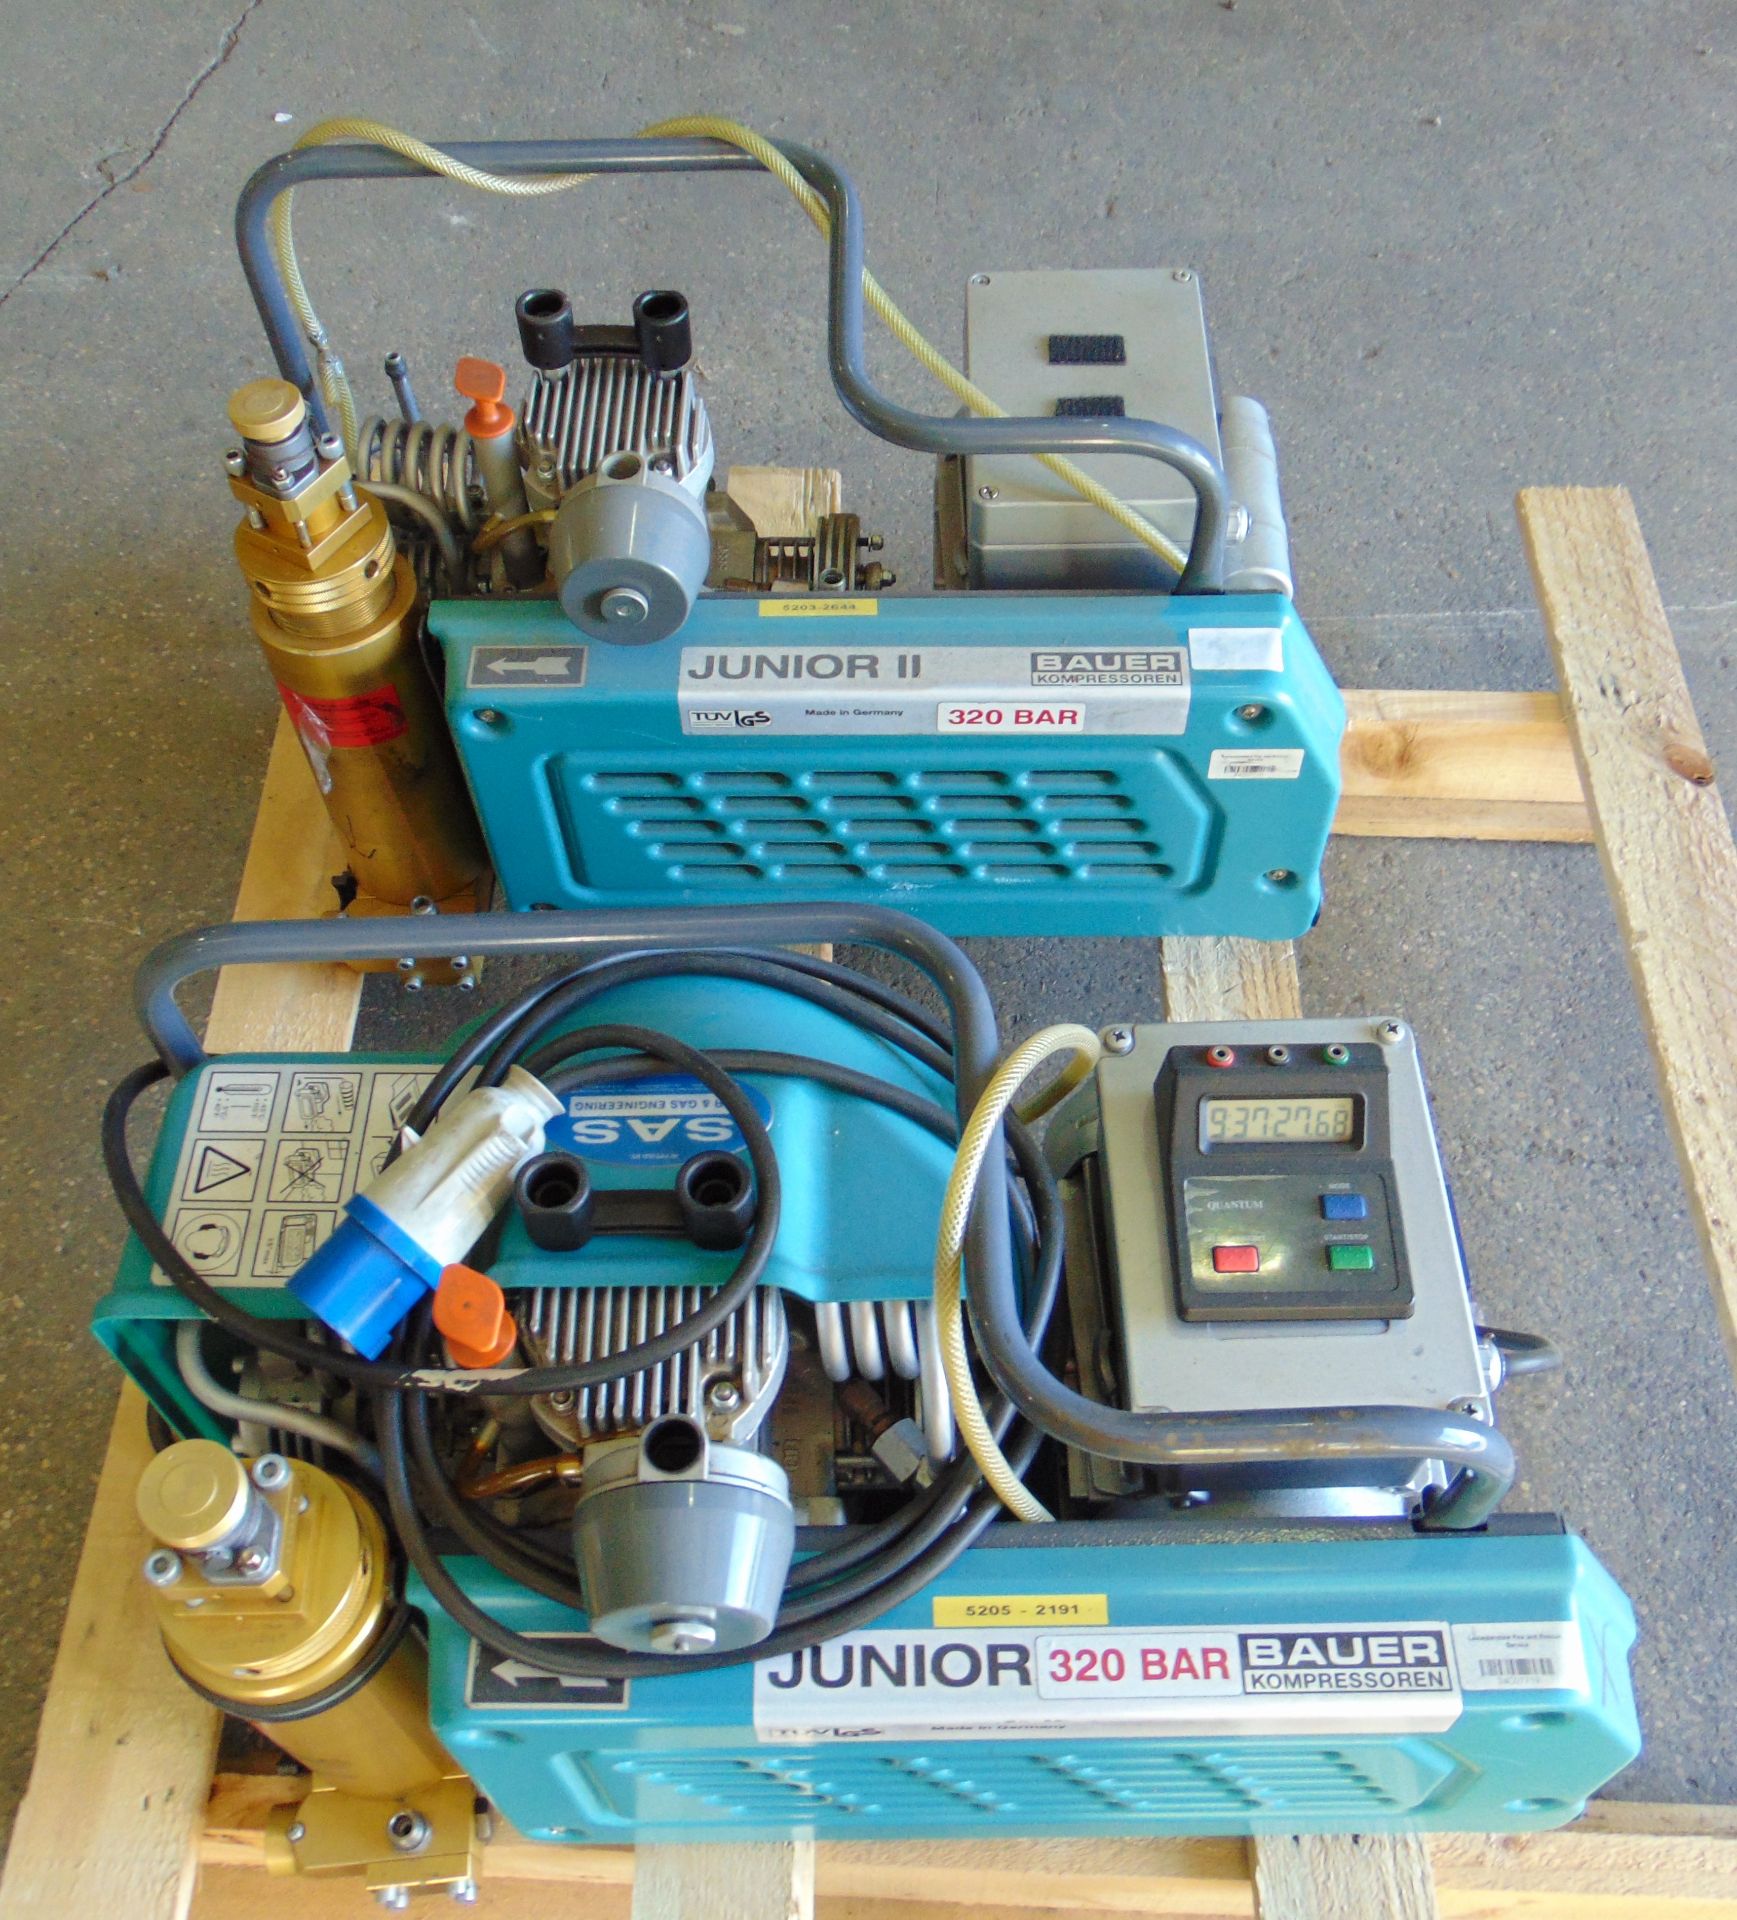 2 x Bauer Junior II Portable Single Phase Electric Air Compressor - Image 2 of 11